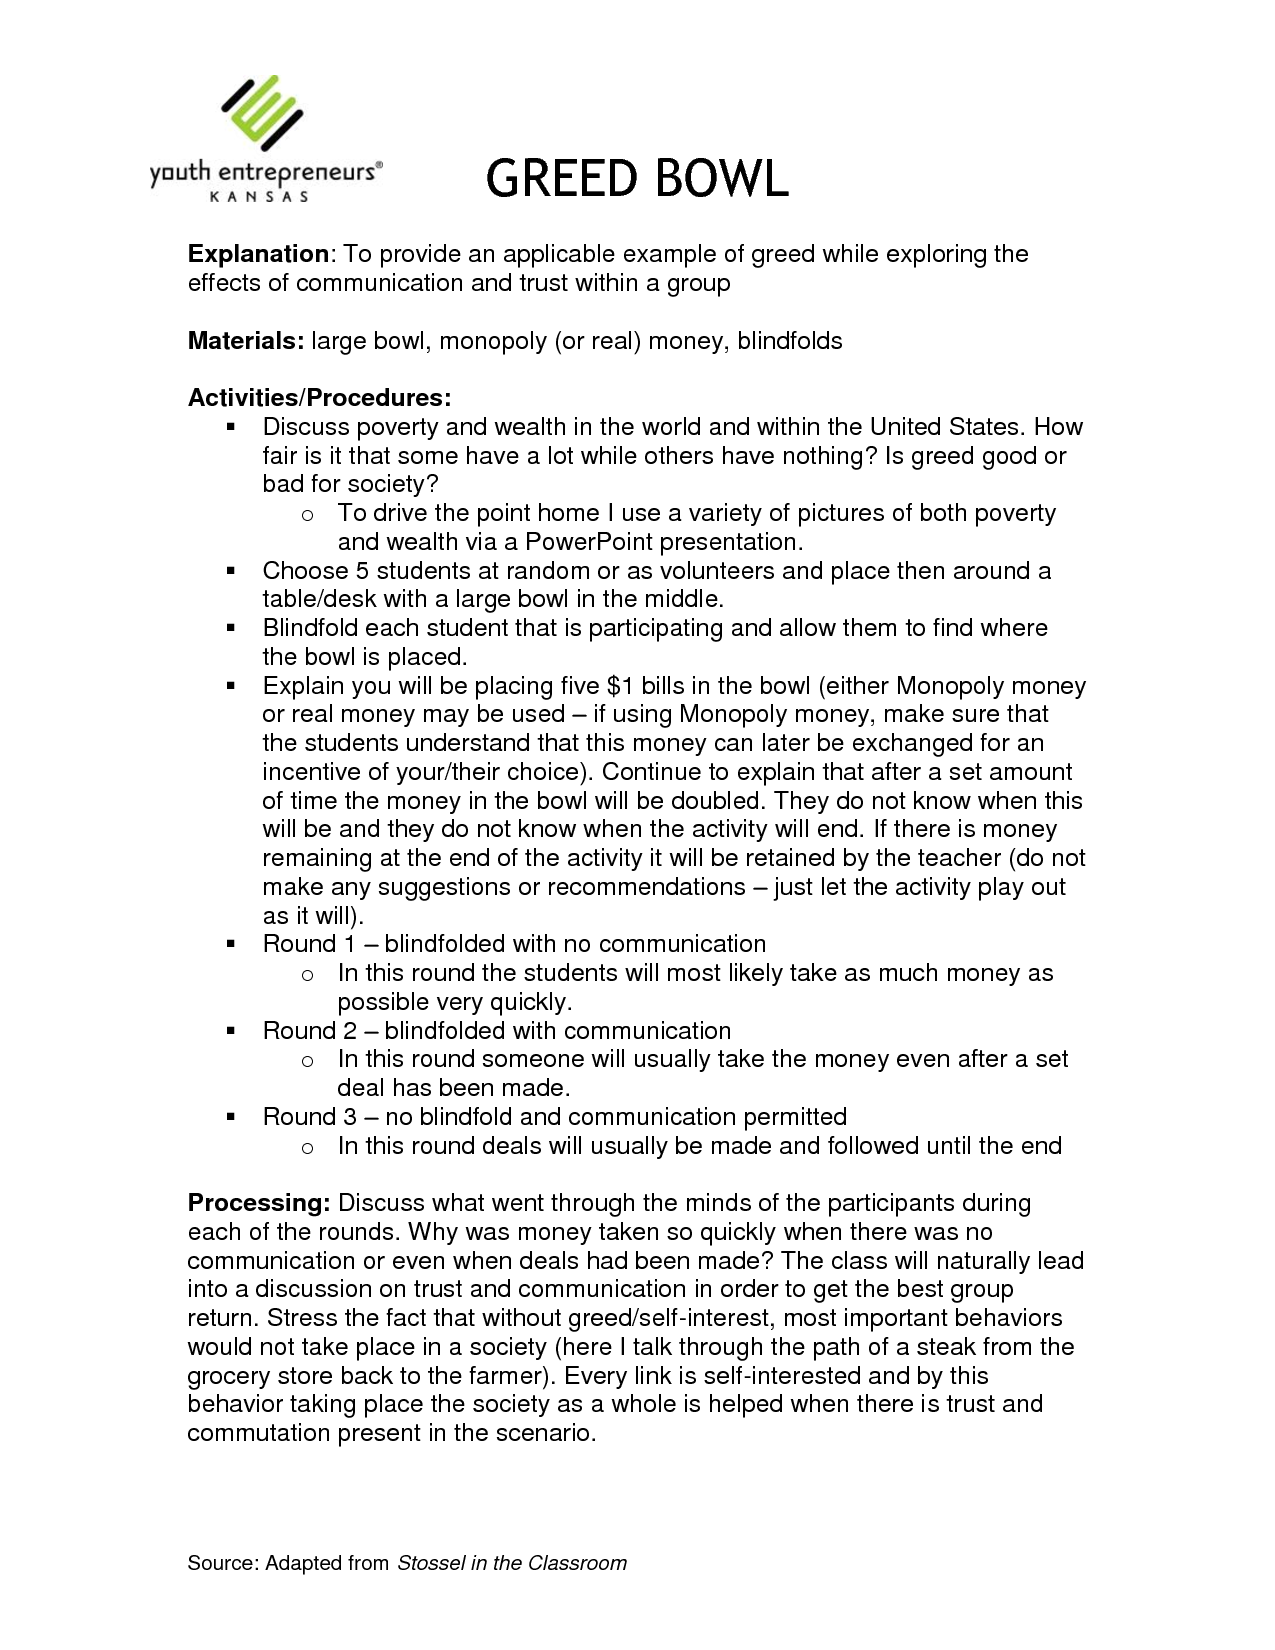 listening-and-writing-practice-interactive-worksheet